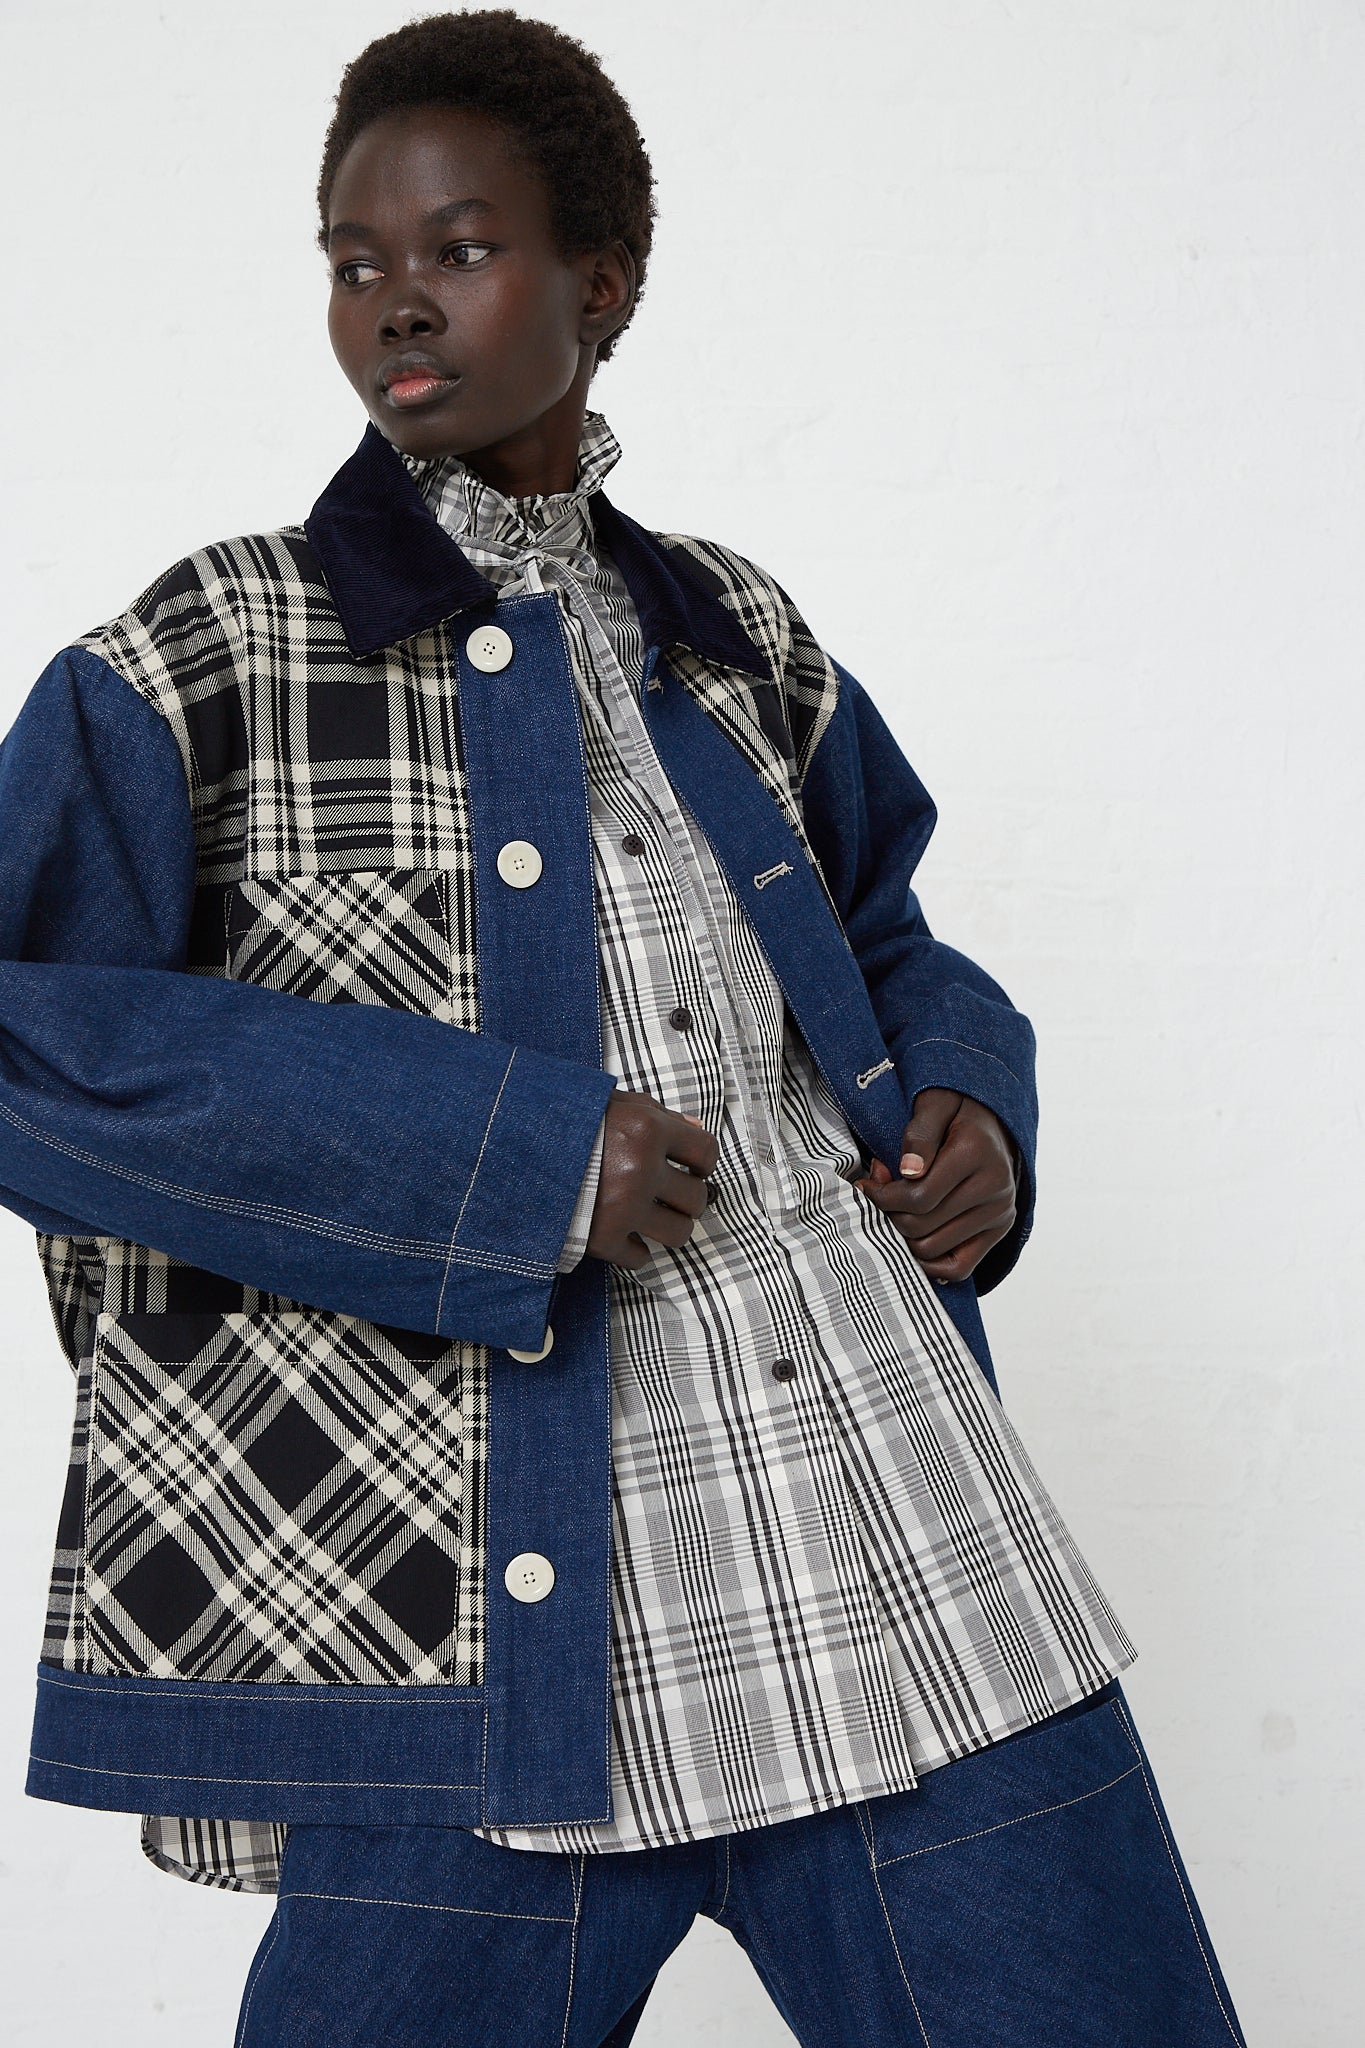 A model wearing a KasMaria Japanese Denim Chore Jacket in Plaid, paired with jeans.